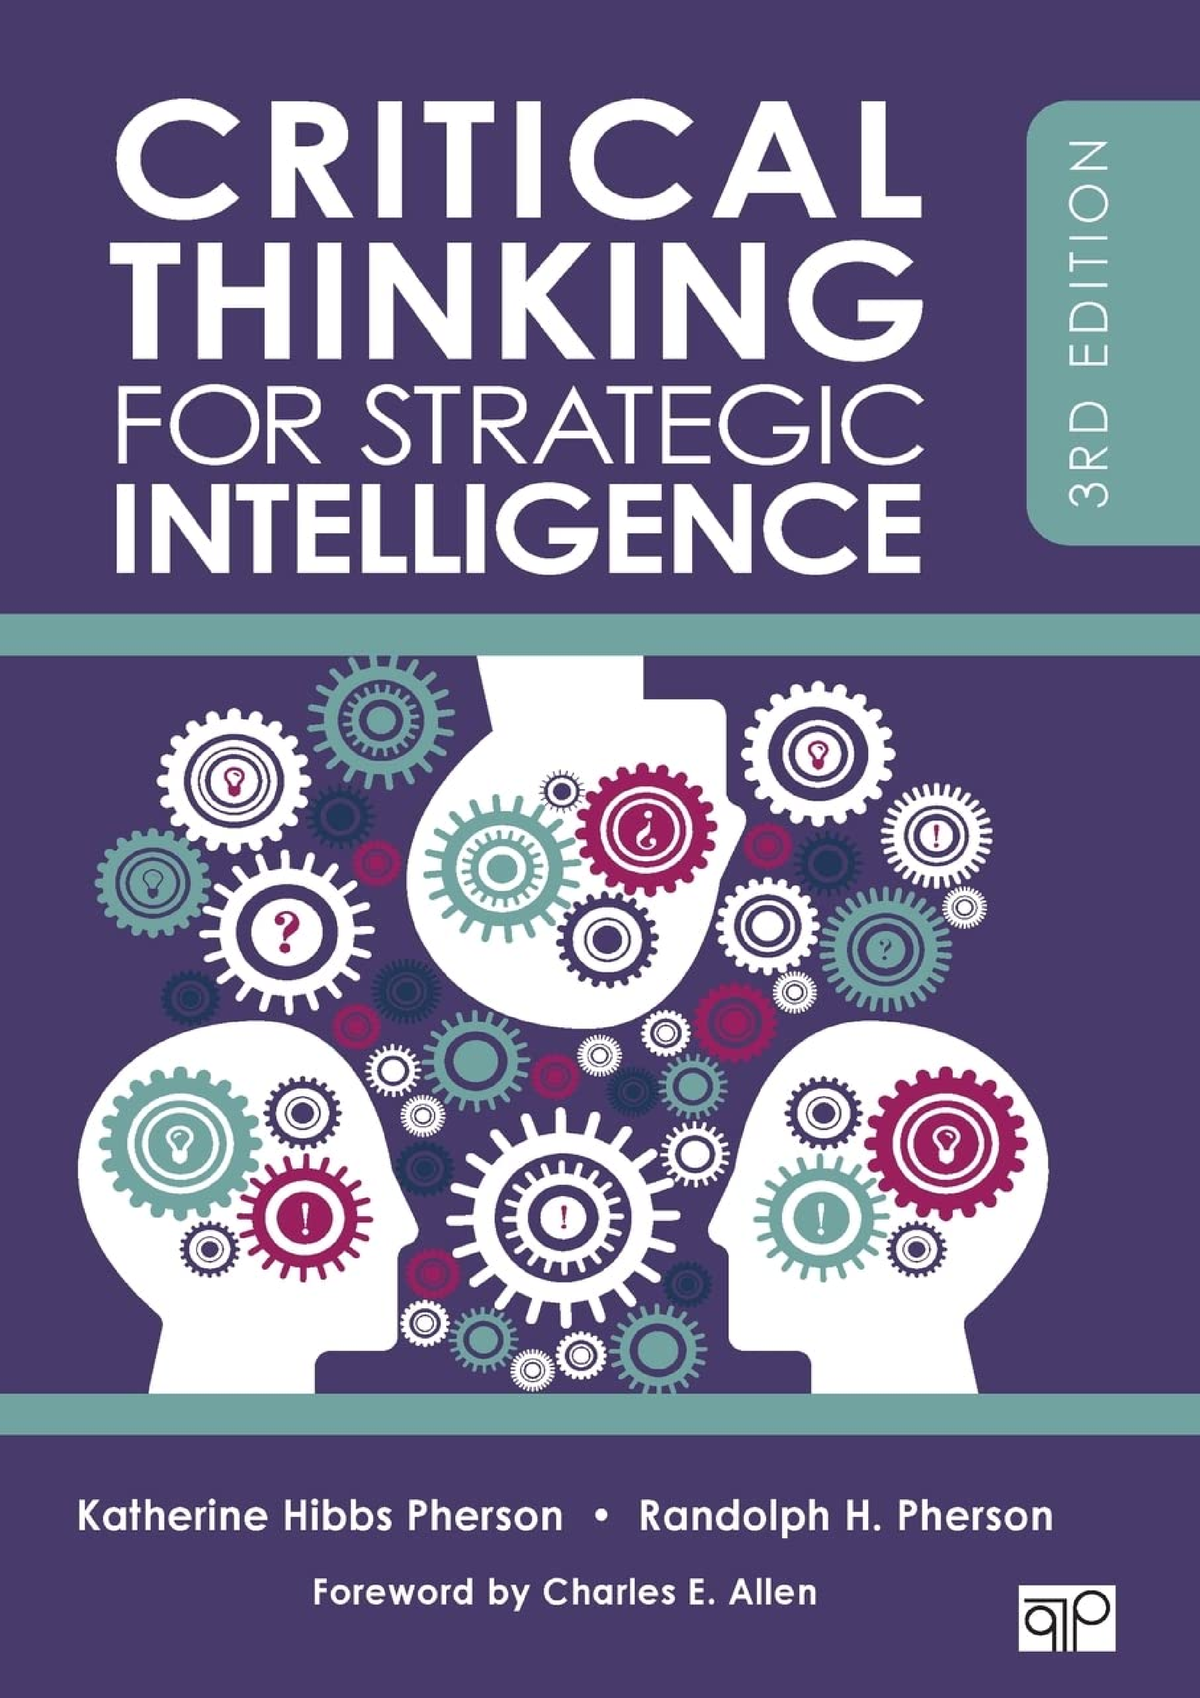 critical thinking and innovation pdf